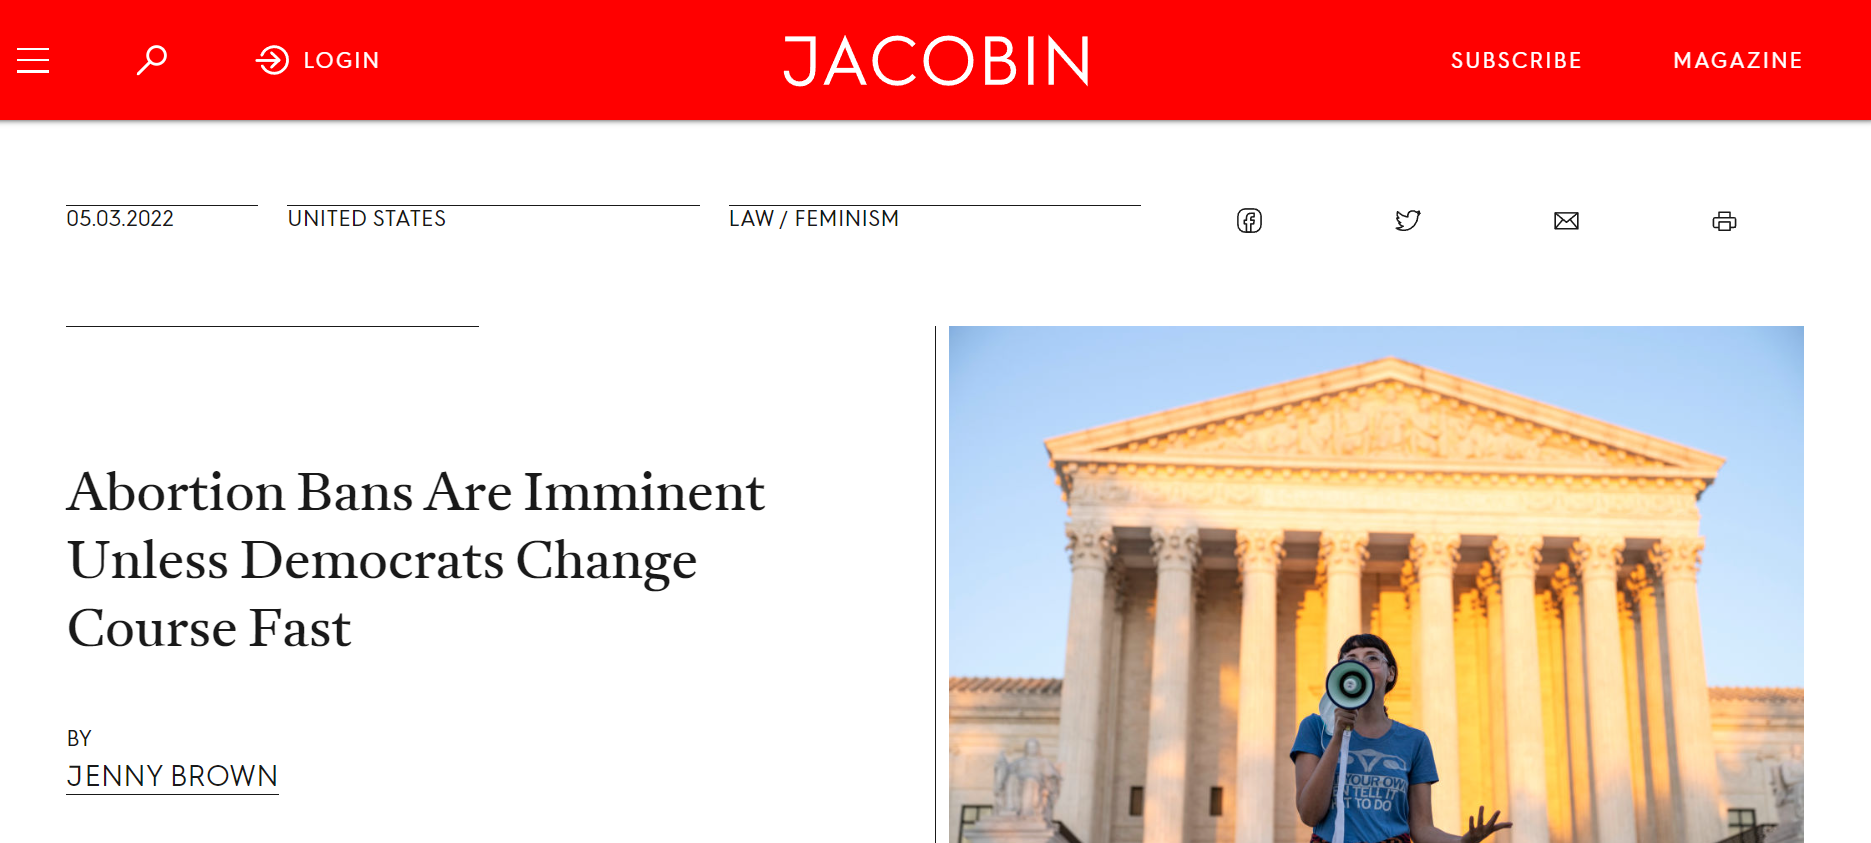 Image of article heading from Jacobin website